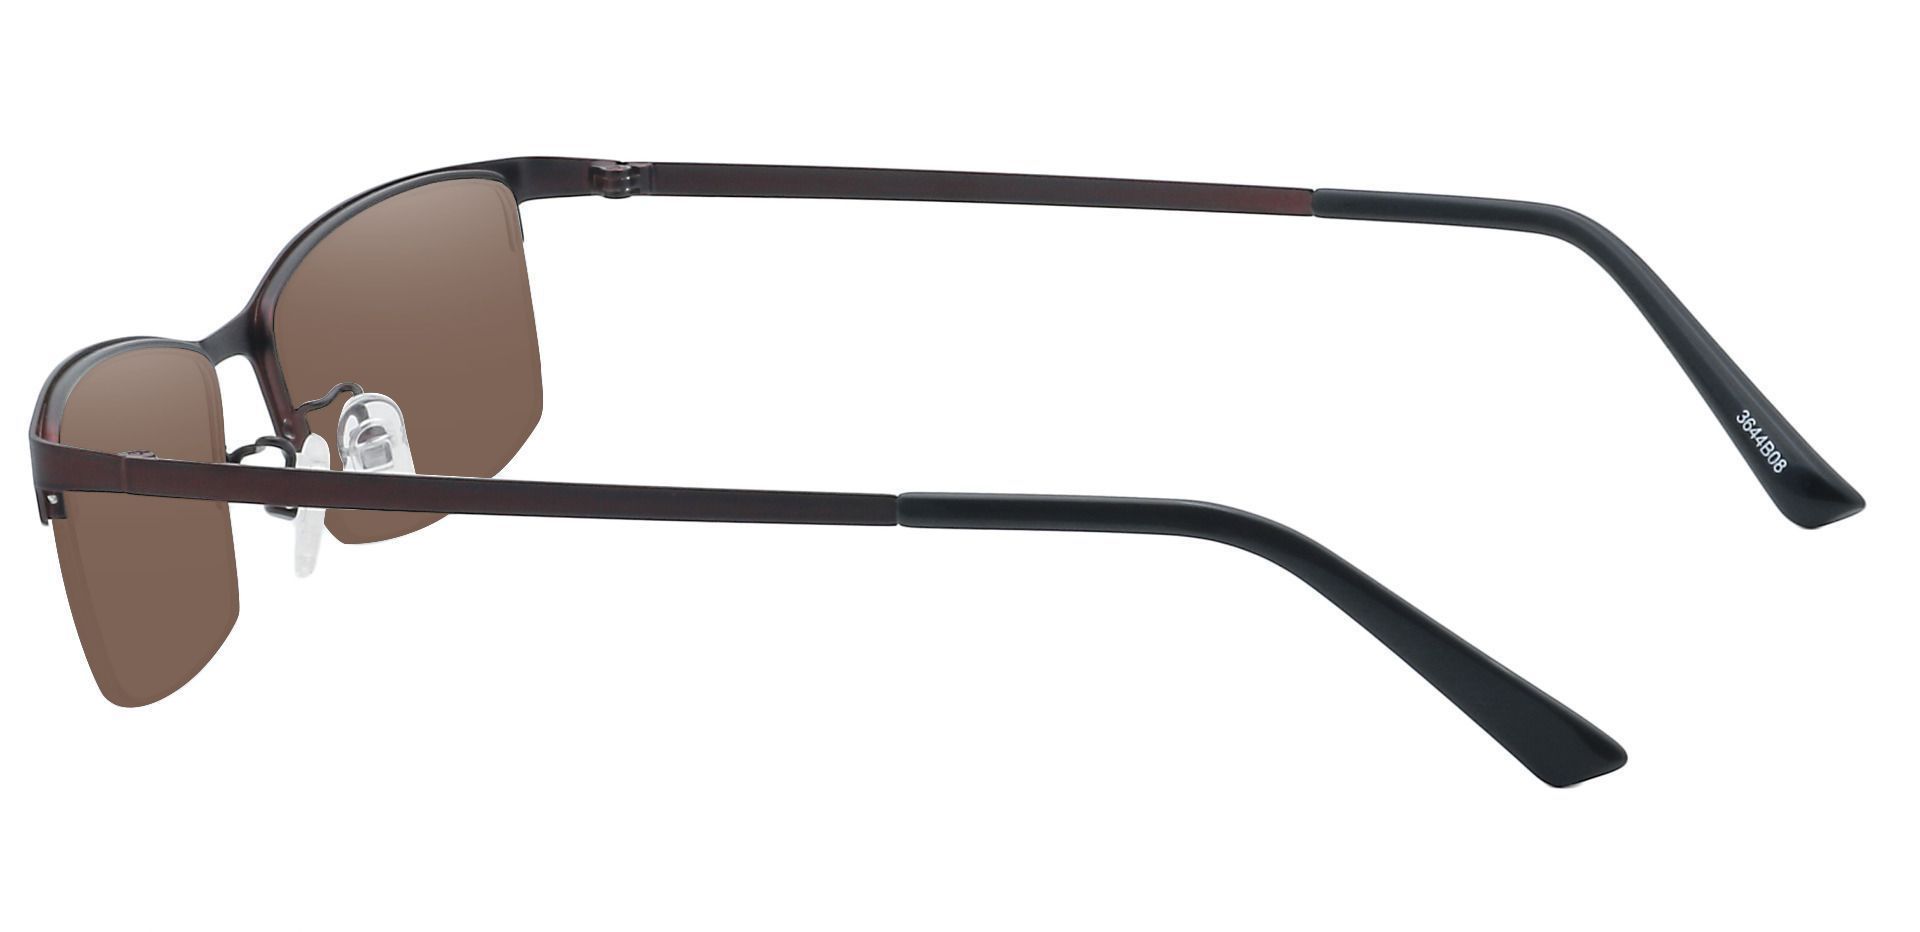 Parsley Rectangle Non-Rx Sunglasses -  Brown Frame With Brown Lenses